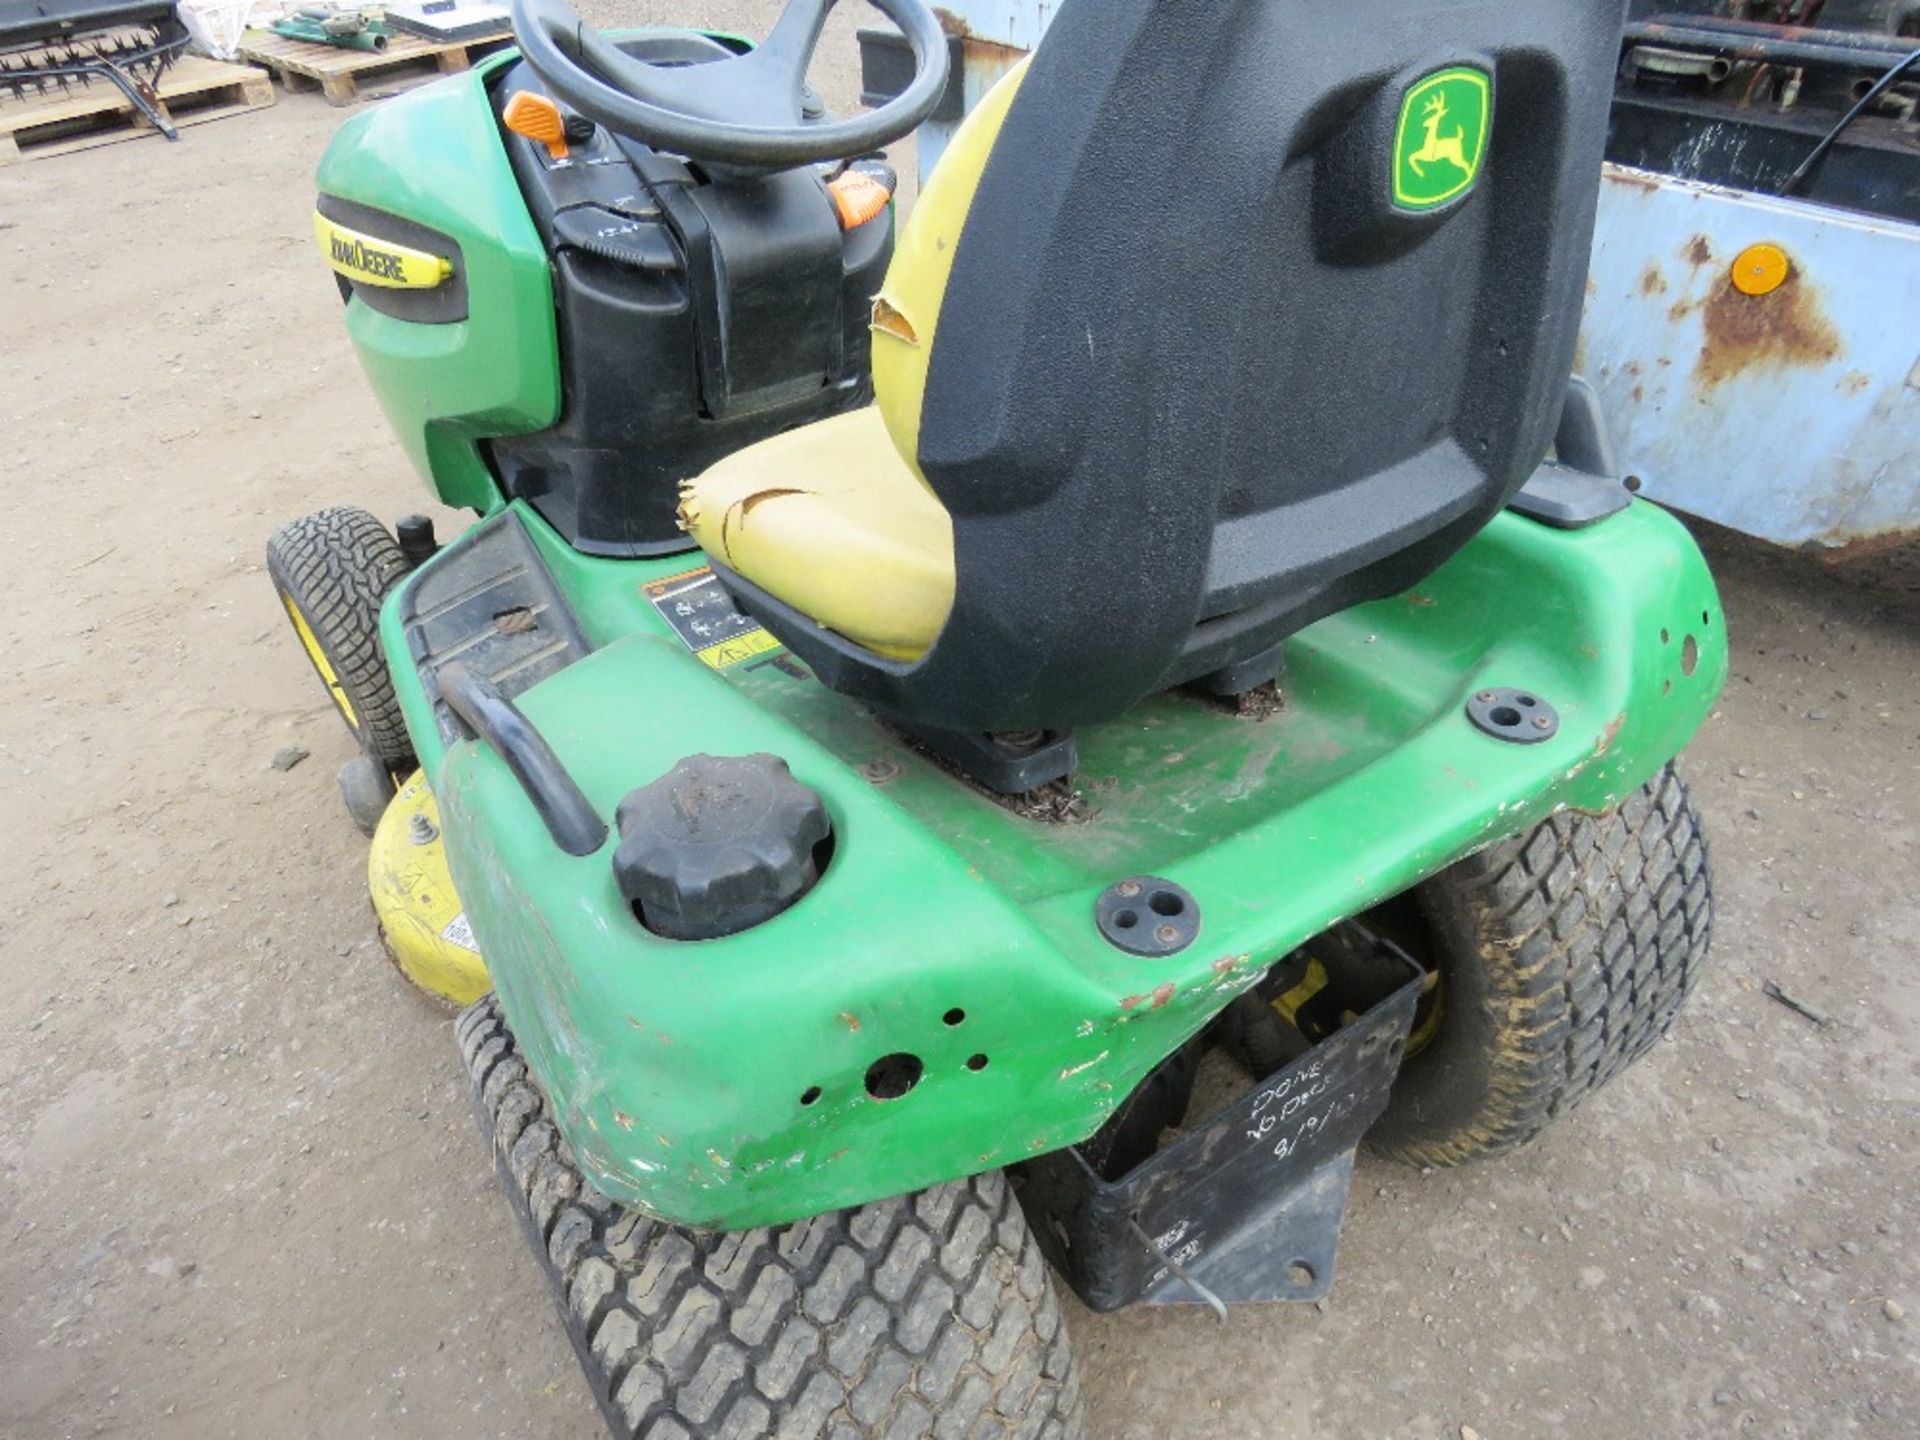 JOHN DEERE X540 PROFESSIONAL RIDE ON PETROL MOWER. PREVIOUS COUNCIL USEAGE. STRAIGHT FROM STORAGE, - Image 4 of 4